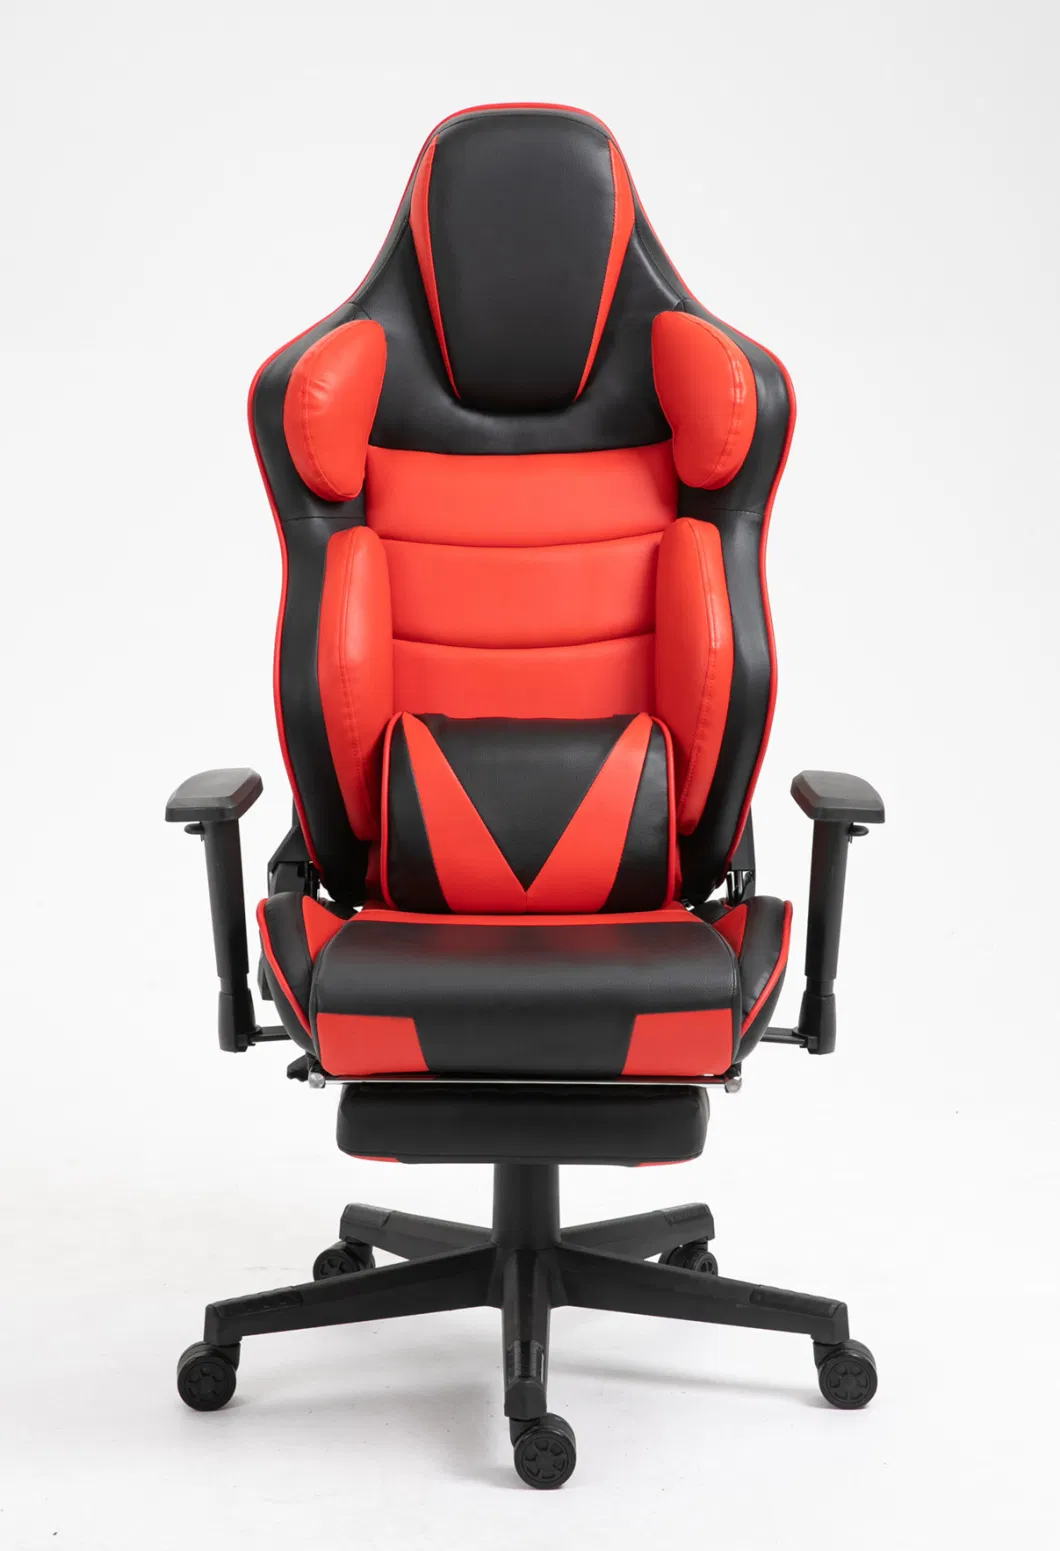 Home Furniture E-Sports Racing Gaming Chair Reclining Office Chair with Footrest